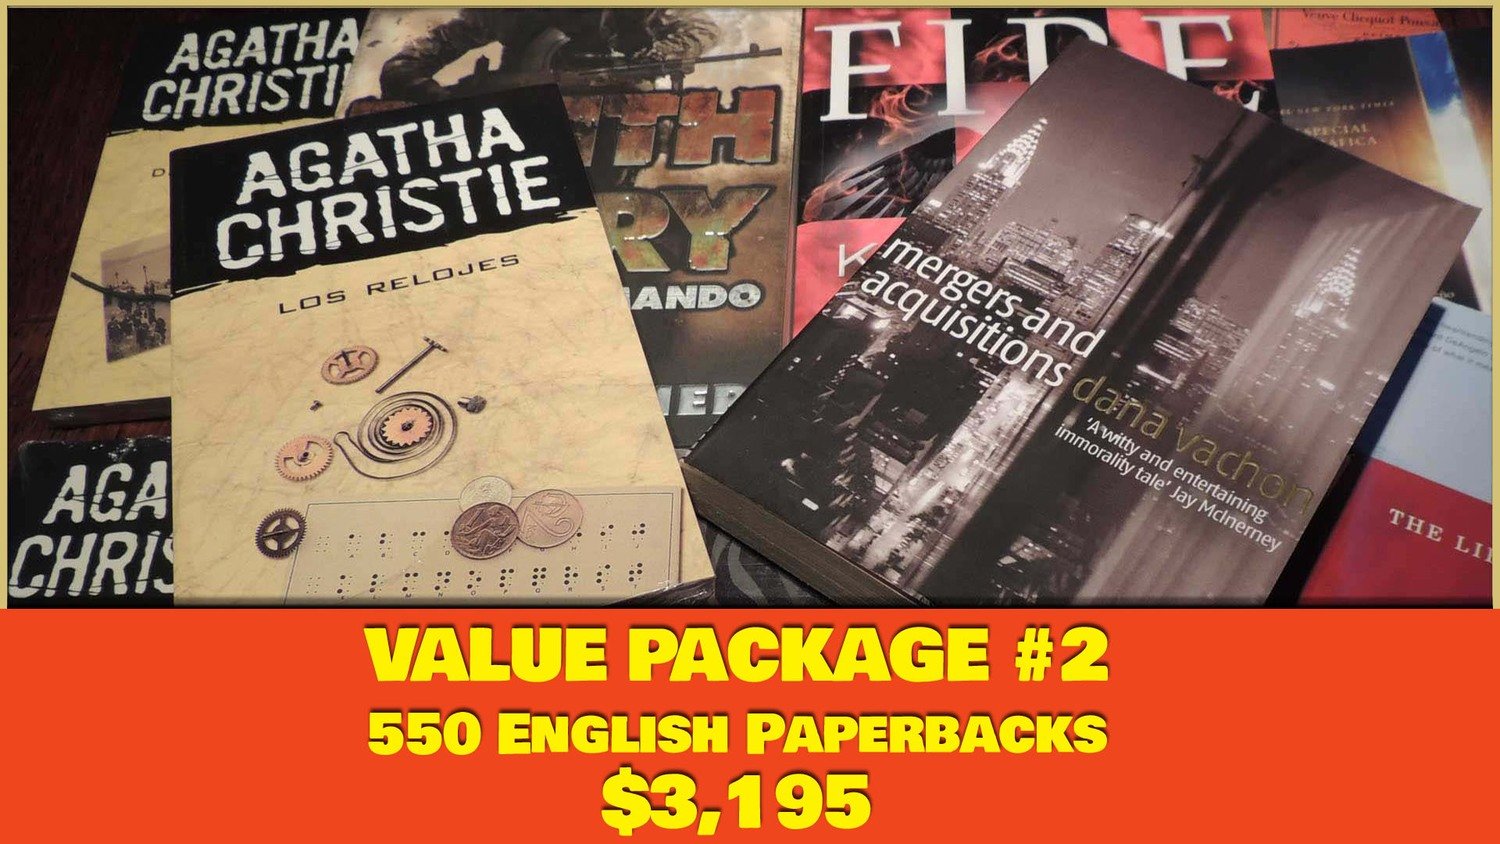 VALUE PACKAGE #2